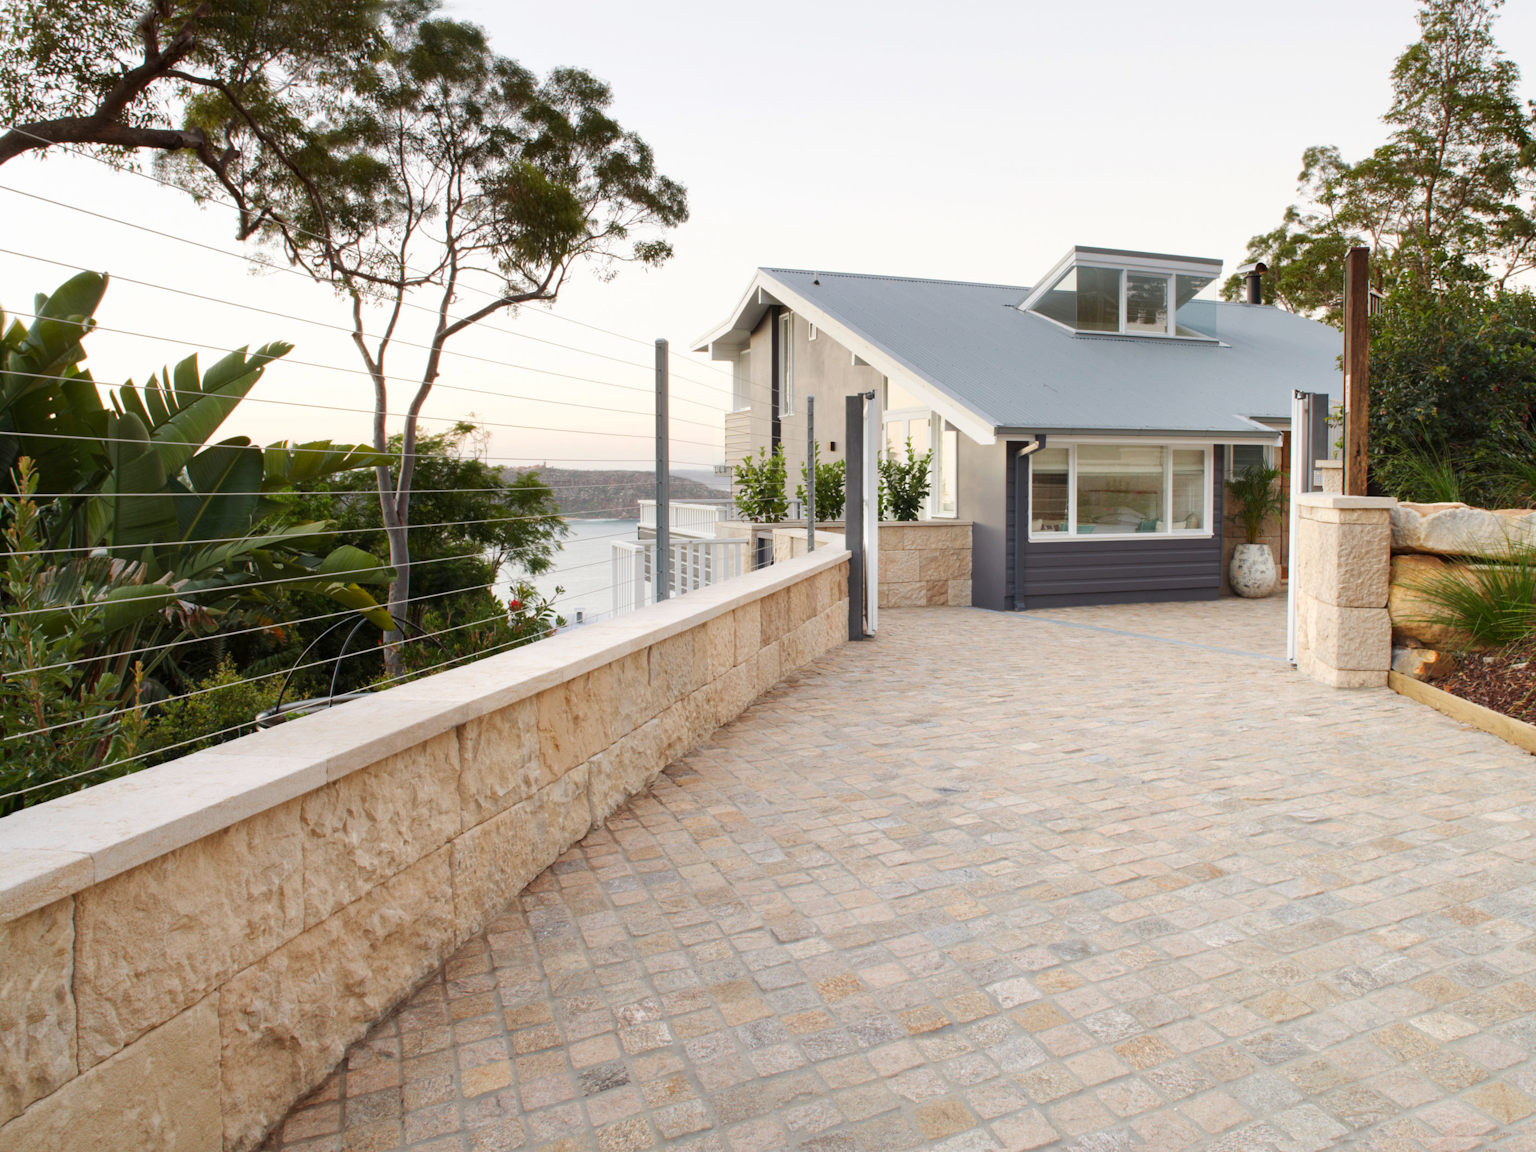 Sesame cobblestones line the driveway with a Barrimah traditional format retaining wall